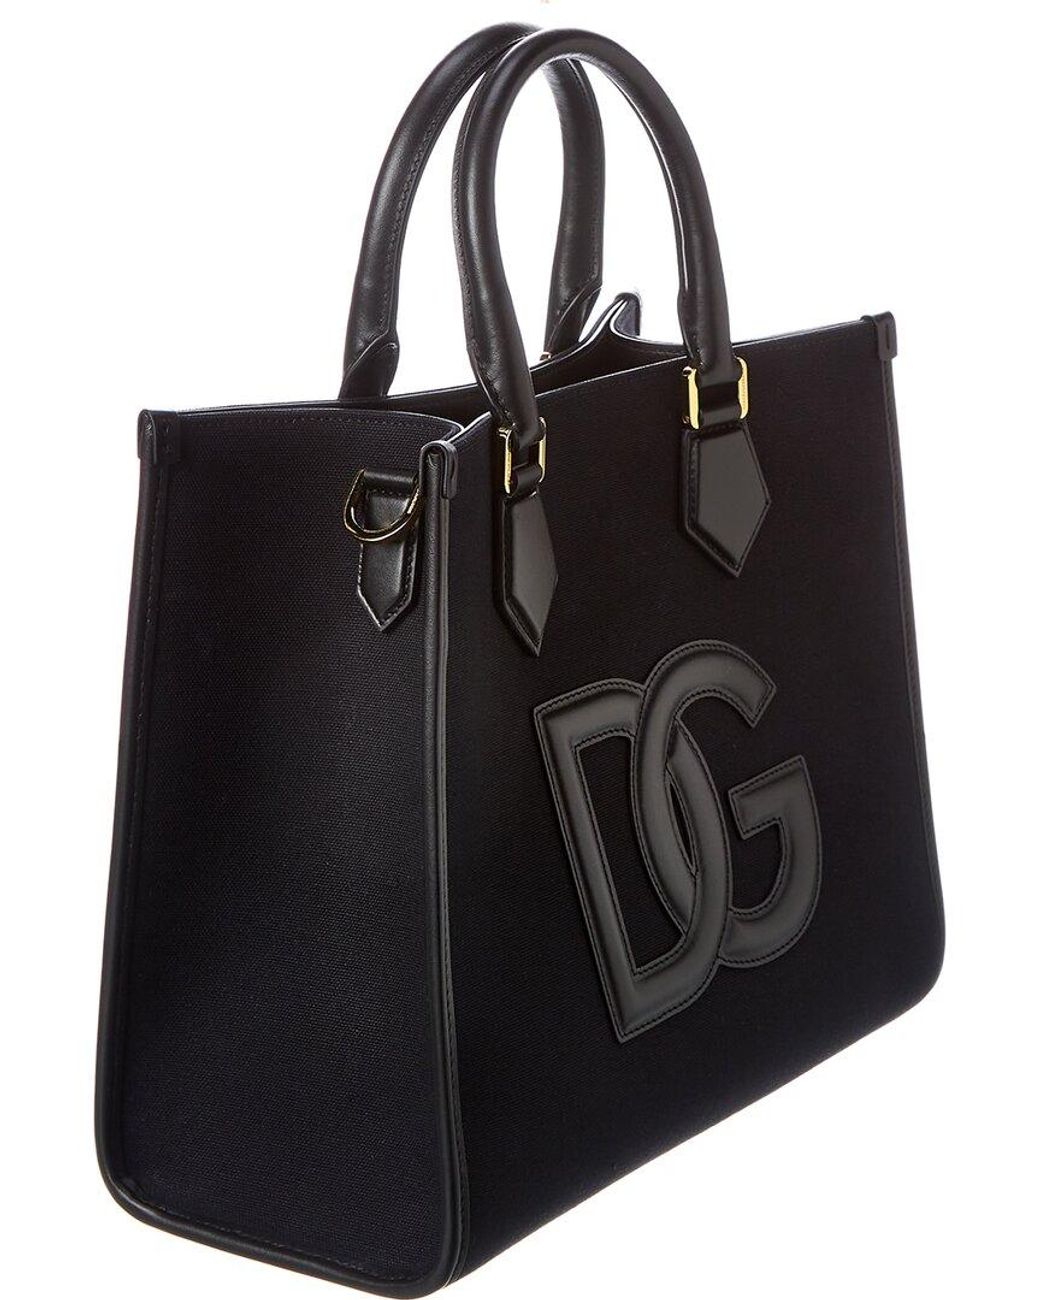 Mens Tote bags Dolce & Gabbana Tote bags Save 9% Dolce & Gabbana Smooth Leather Tote Bag in Black for Men 